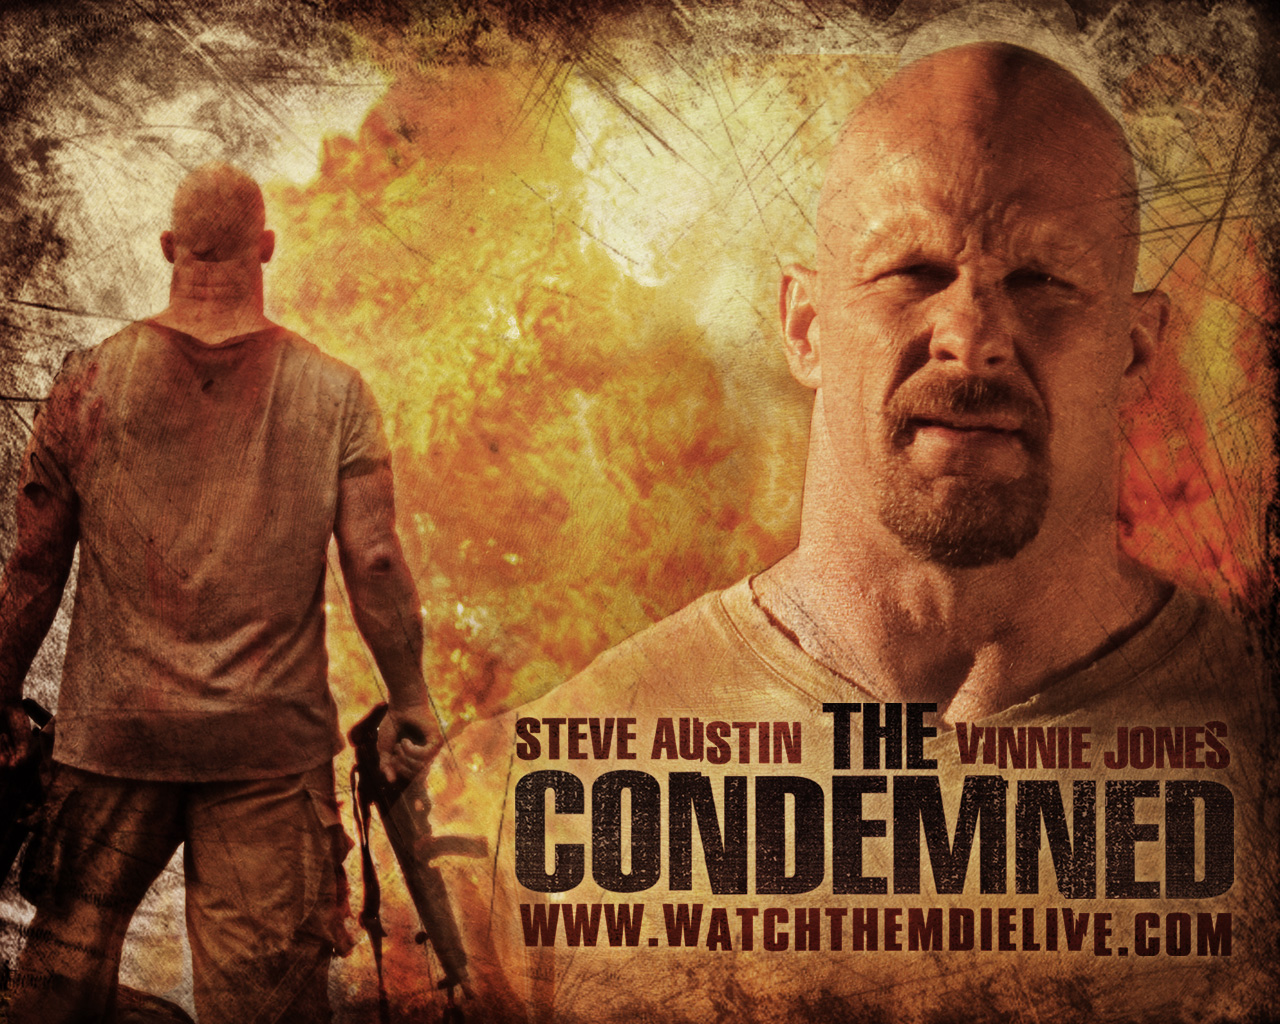 Steve Austin In The Condemned Wallpaper - Wwe Stone Cold Movie - HD Wallpaper 